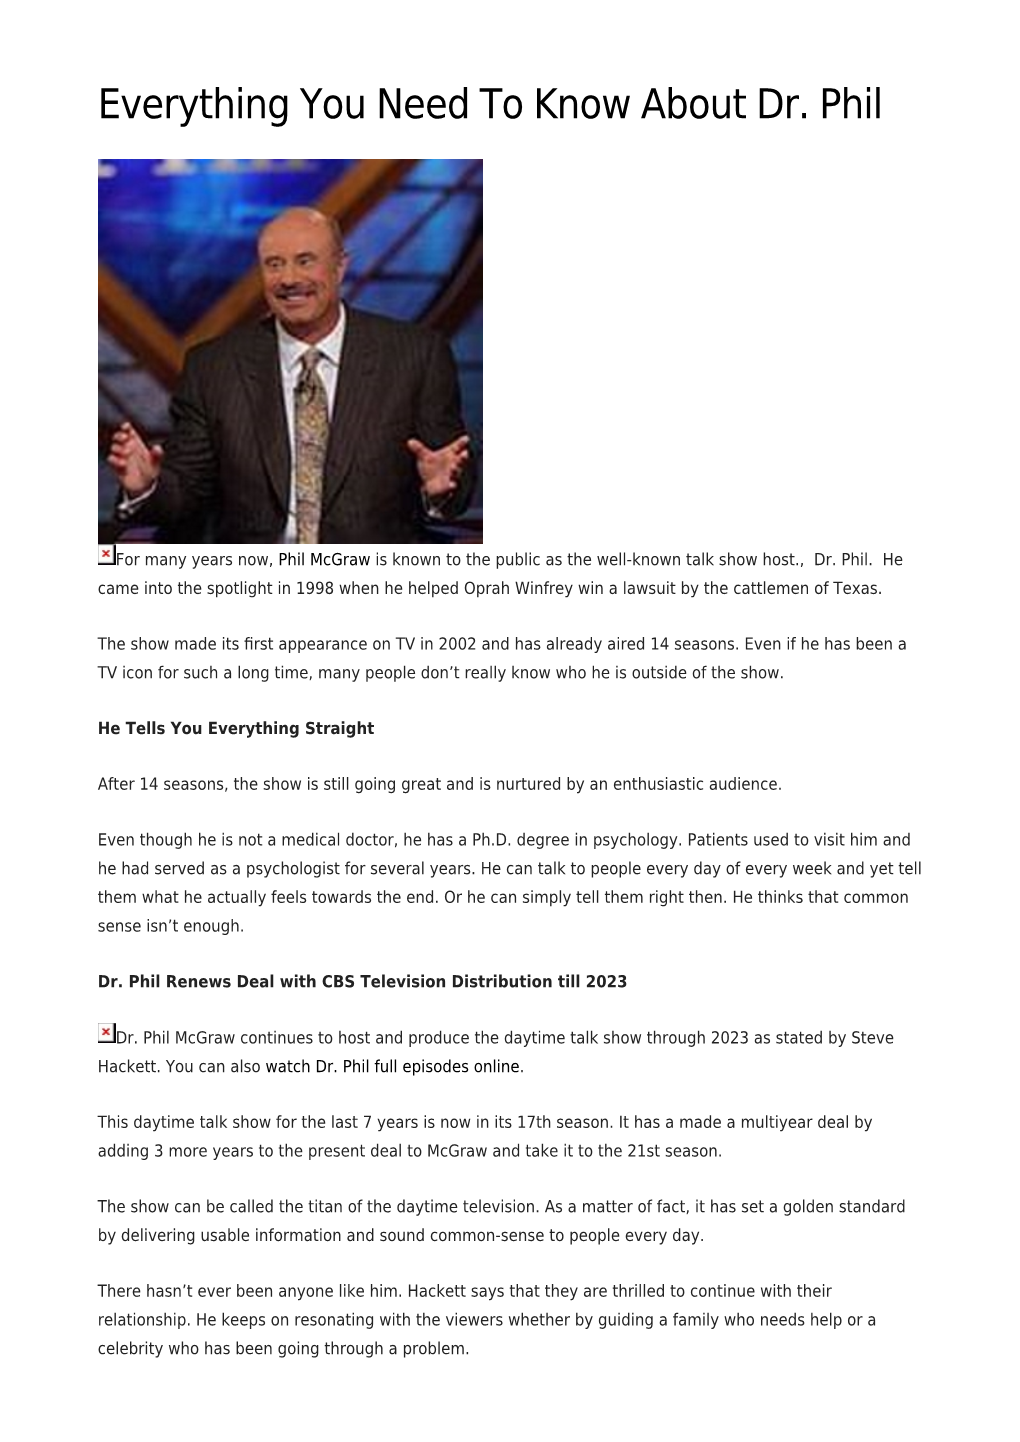 Everything You Need to Know About Dr. Phil